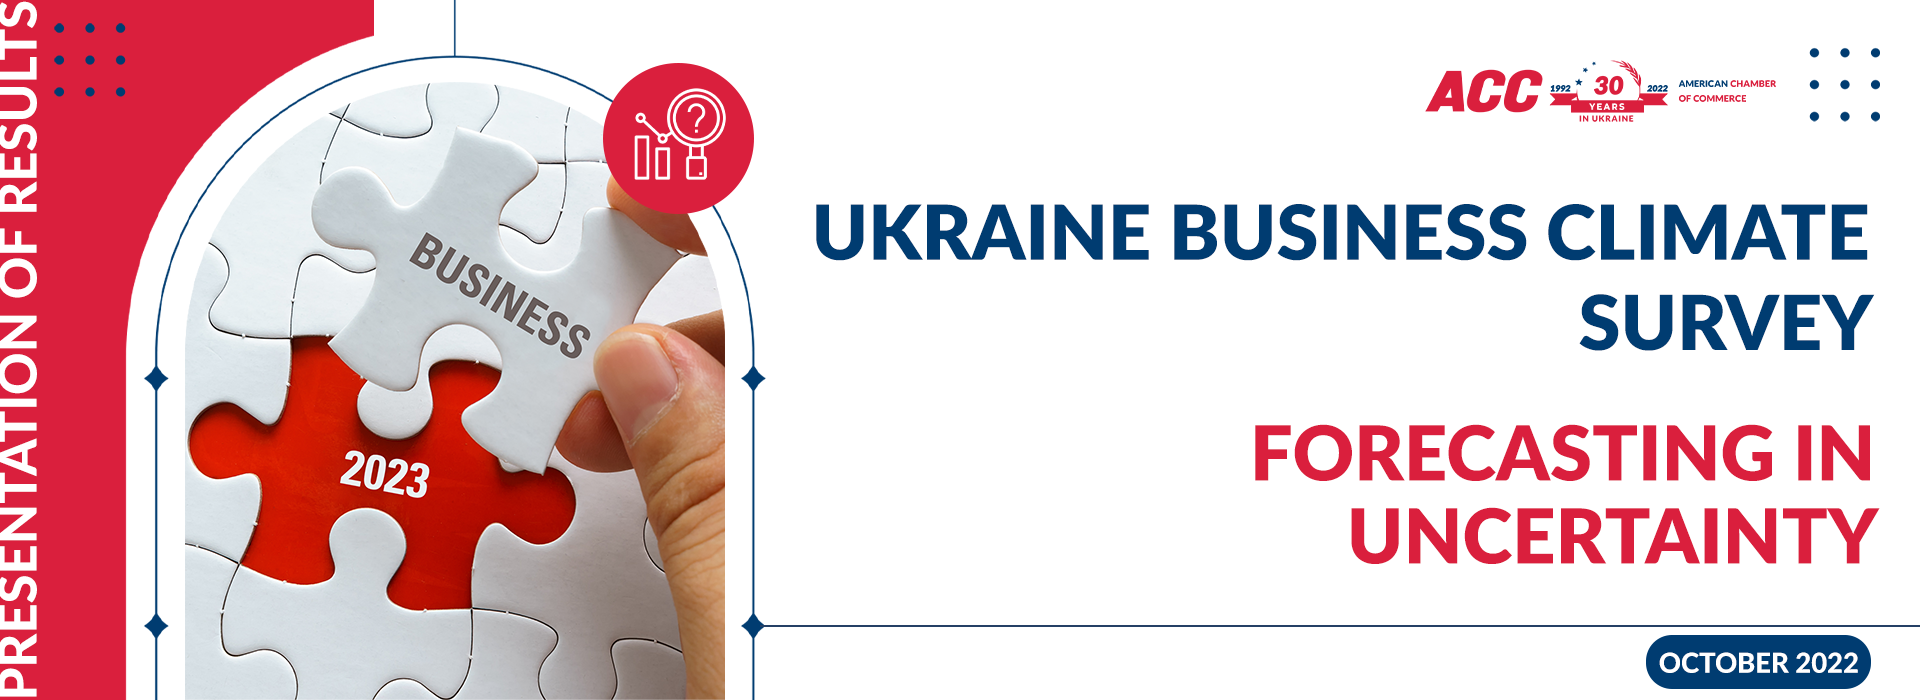 AmCham Ukraine Business Climate Survey Results – Forecasting in Uncertainty